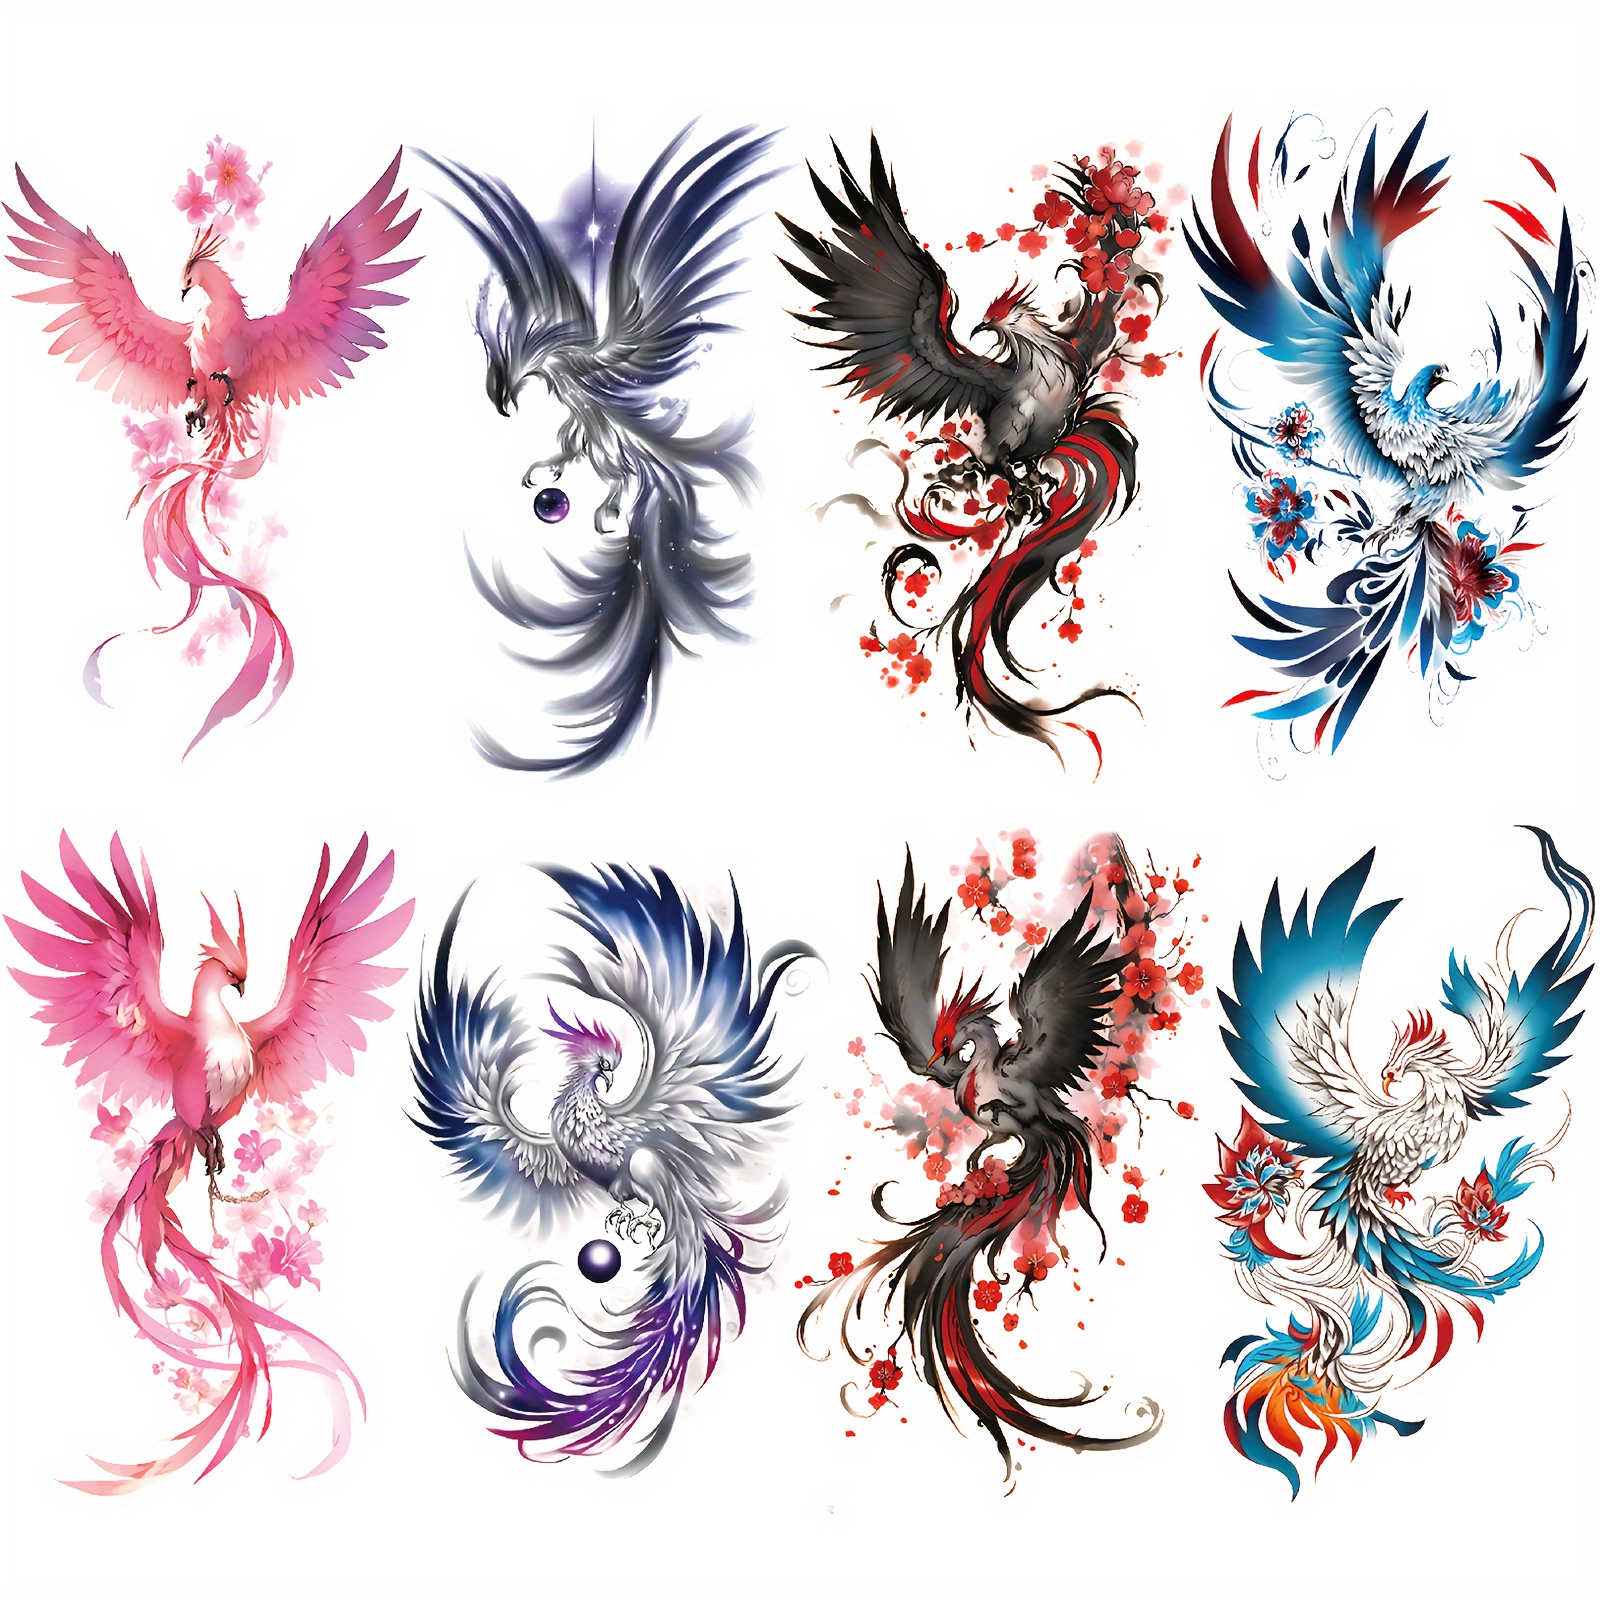 

8pcs Colorful Phoenix Arm Temporary Tattoo Stickers For Men And Women Adults, Body Art Large Half Arm Sleeve Temporary Tattoo Stickers, Waterproof Realistic Tattoo Temporary Tattoo Stickers